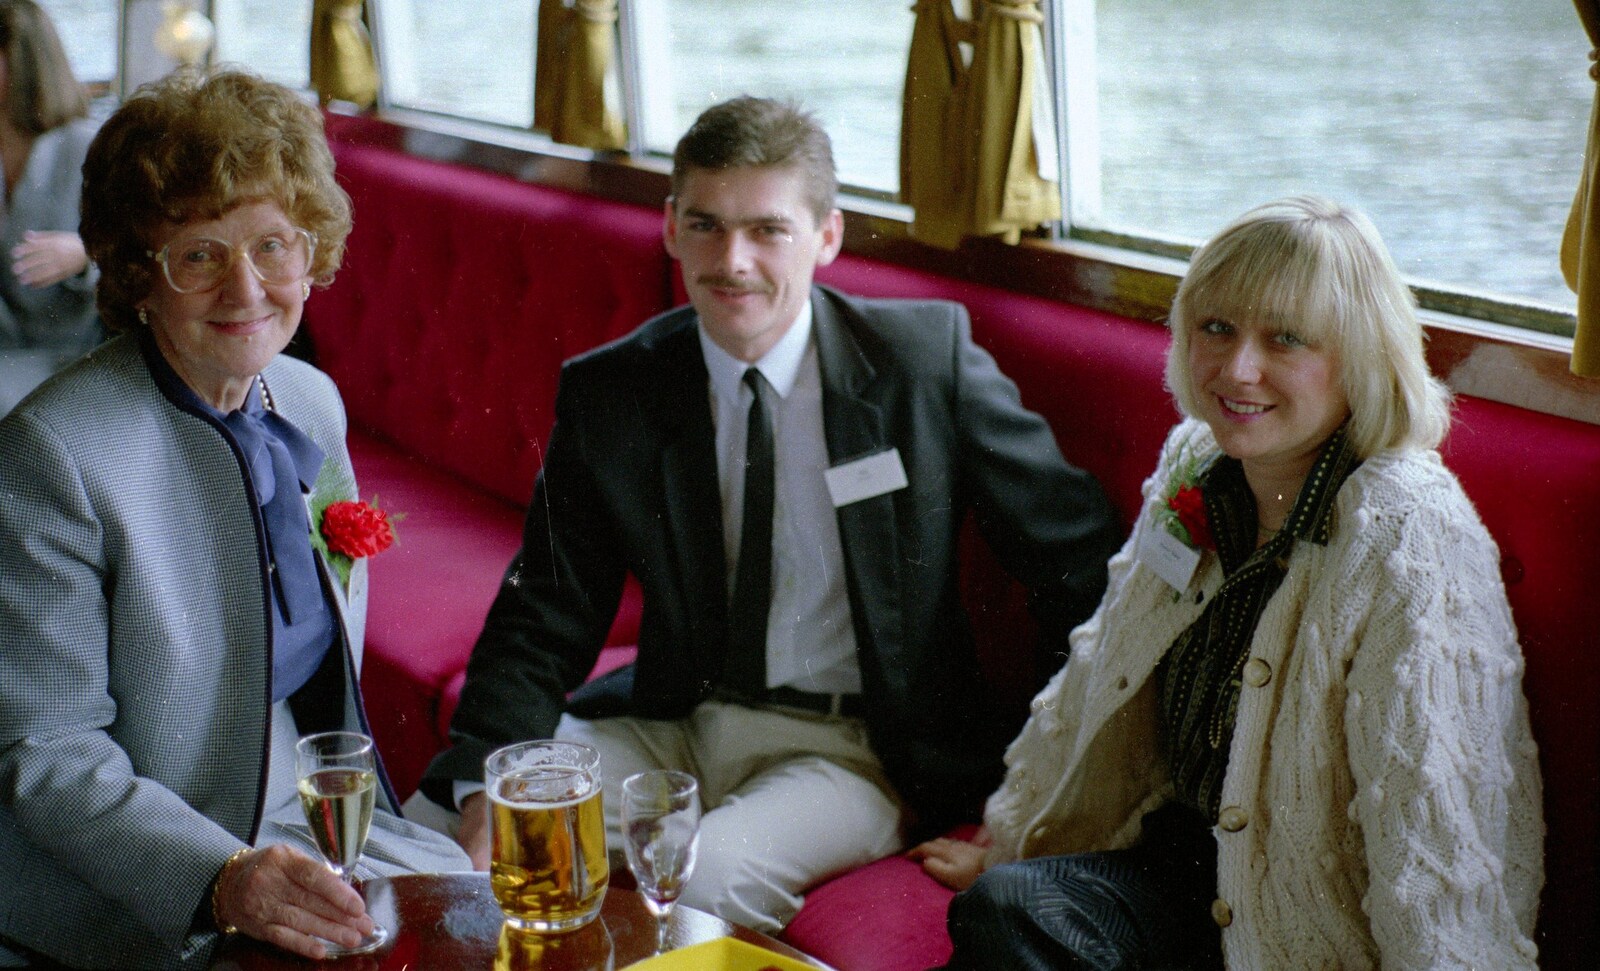 Sheila Coleman (left) - Brian Coleman's wife from A Soman-Wherry Press Boat Trip, Horning, The Broads, Norfolk - 8th May 1988